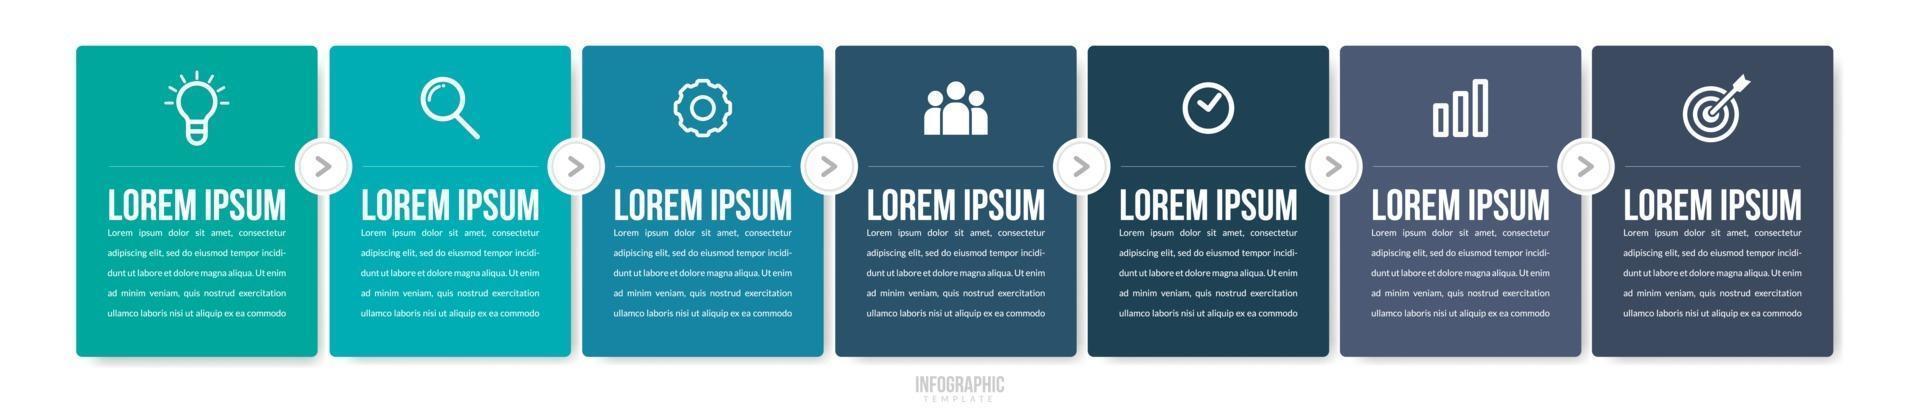 Business Concept with 4 Options vector